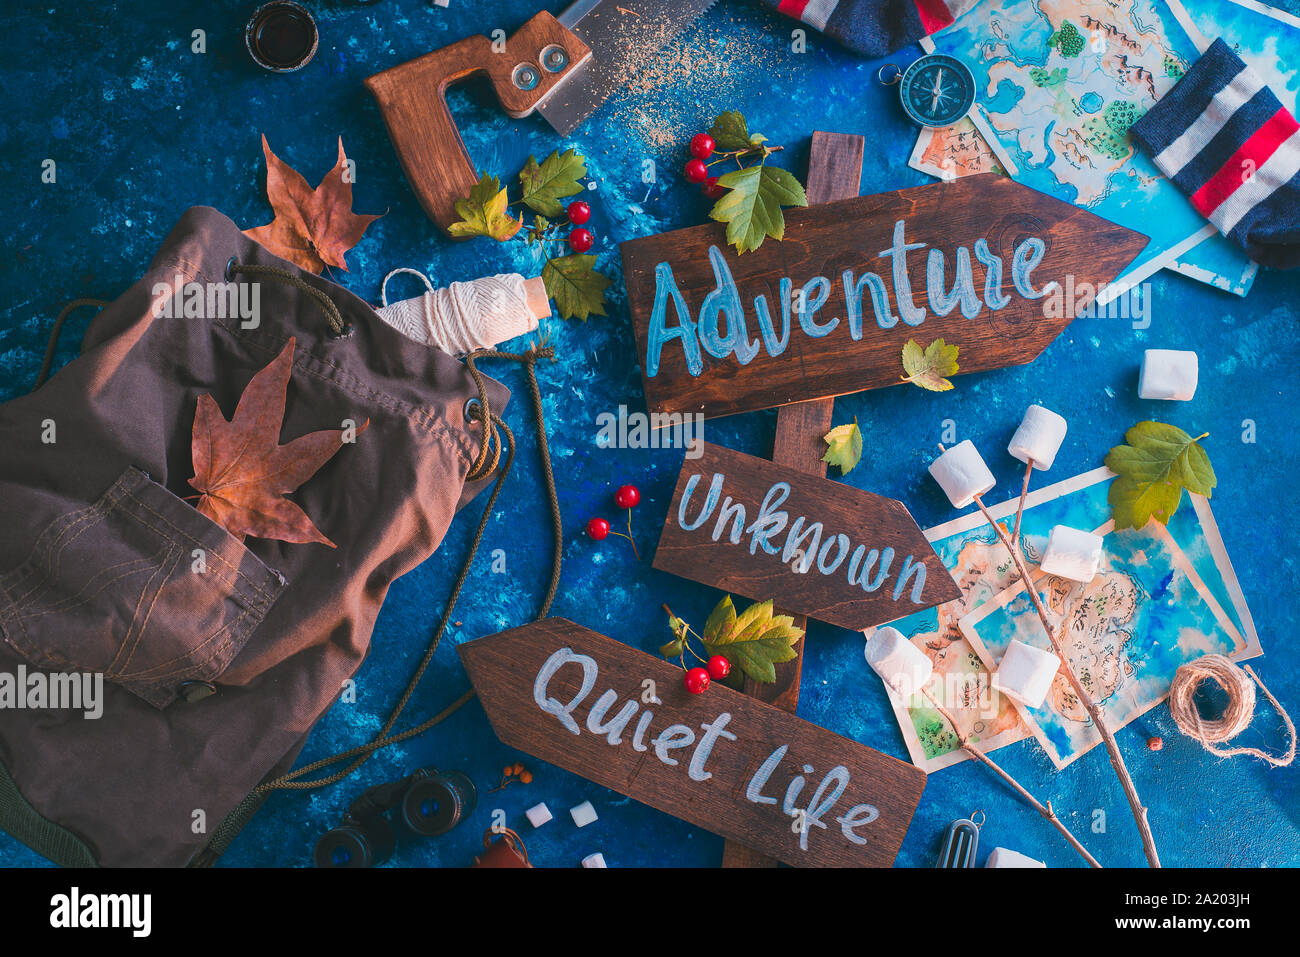 Road sign with Adventure, Unknown and Quiet Life directions. Travel essentials creative header with socks, maps, and marshmallows, wanderlust concept Stock Photo